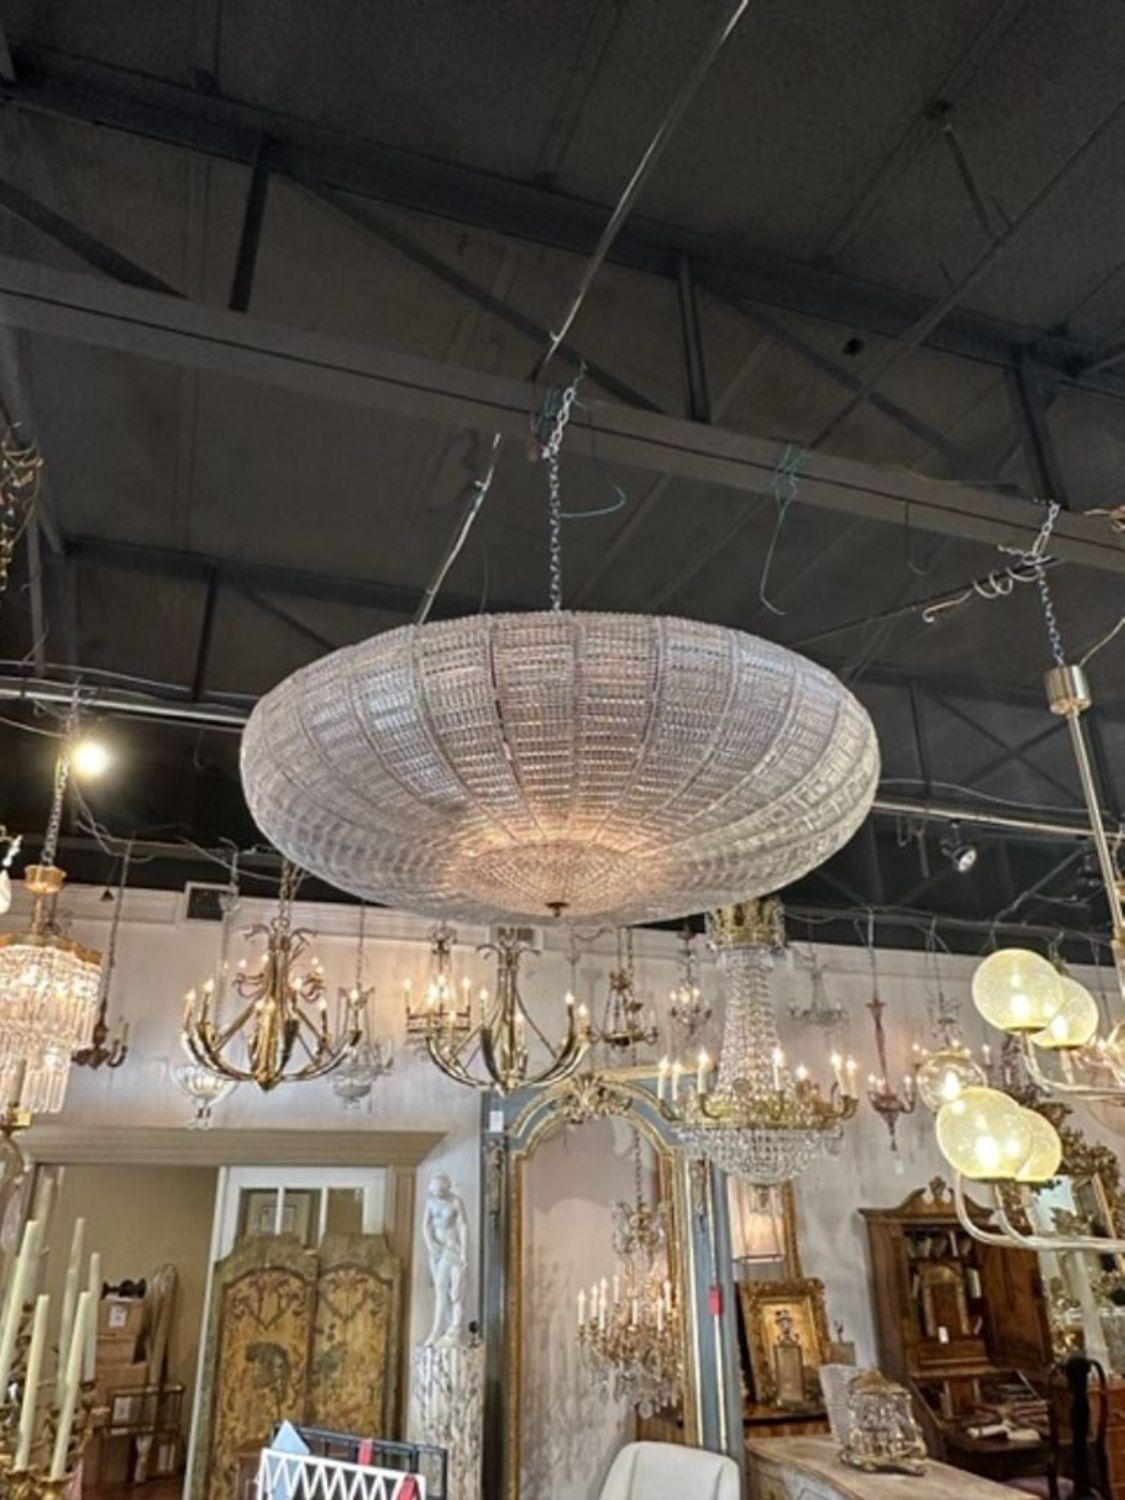 Impressive large scale flush mount Murano chandelier. Featuring beautiful textured glass. A perfect touch for a designer look!